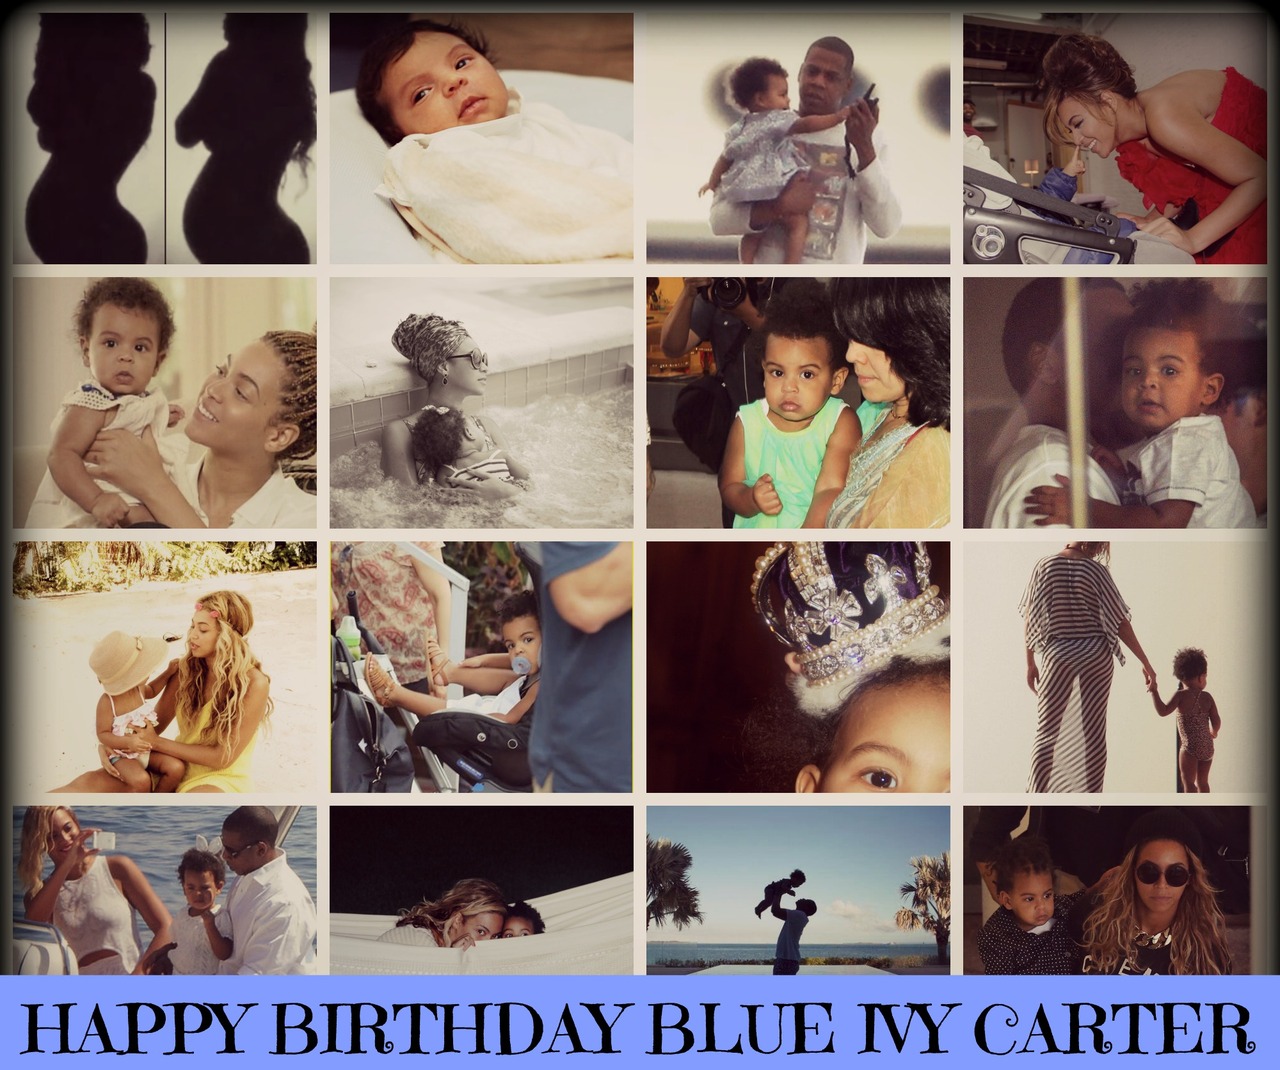 Beyoncé Commemorates Blue Ivy's 2nd Birthday with Fan Tumblr Blog1280 x 1070